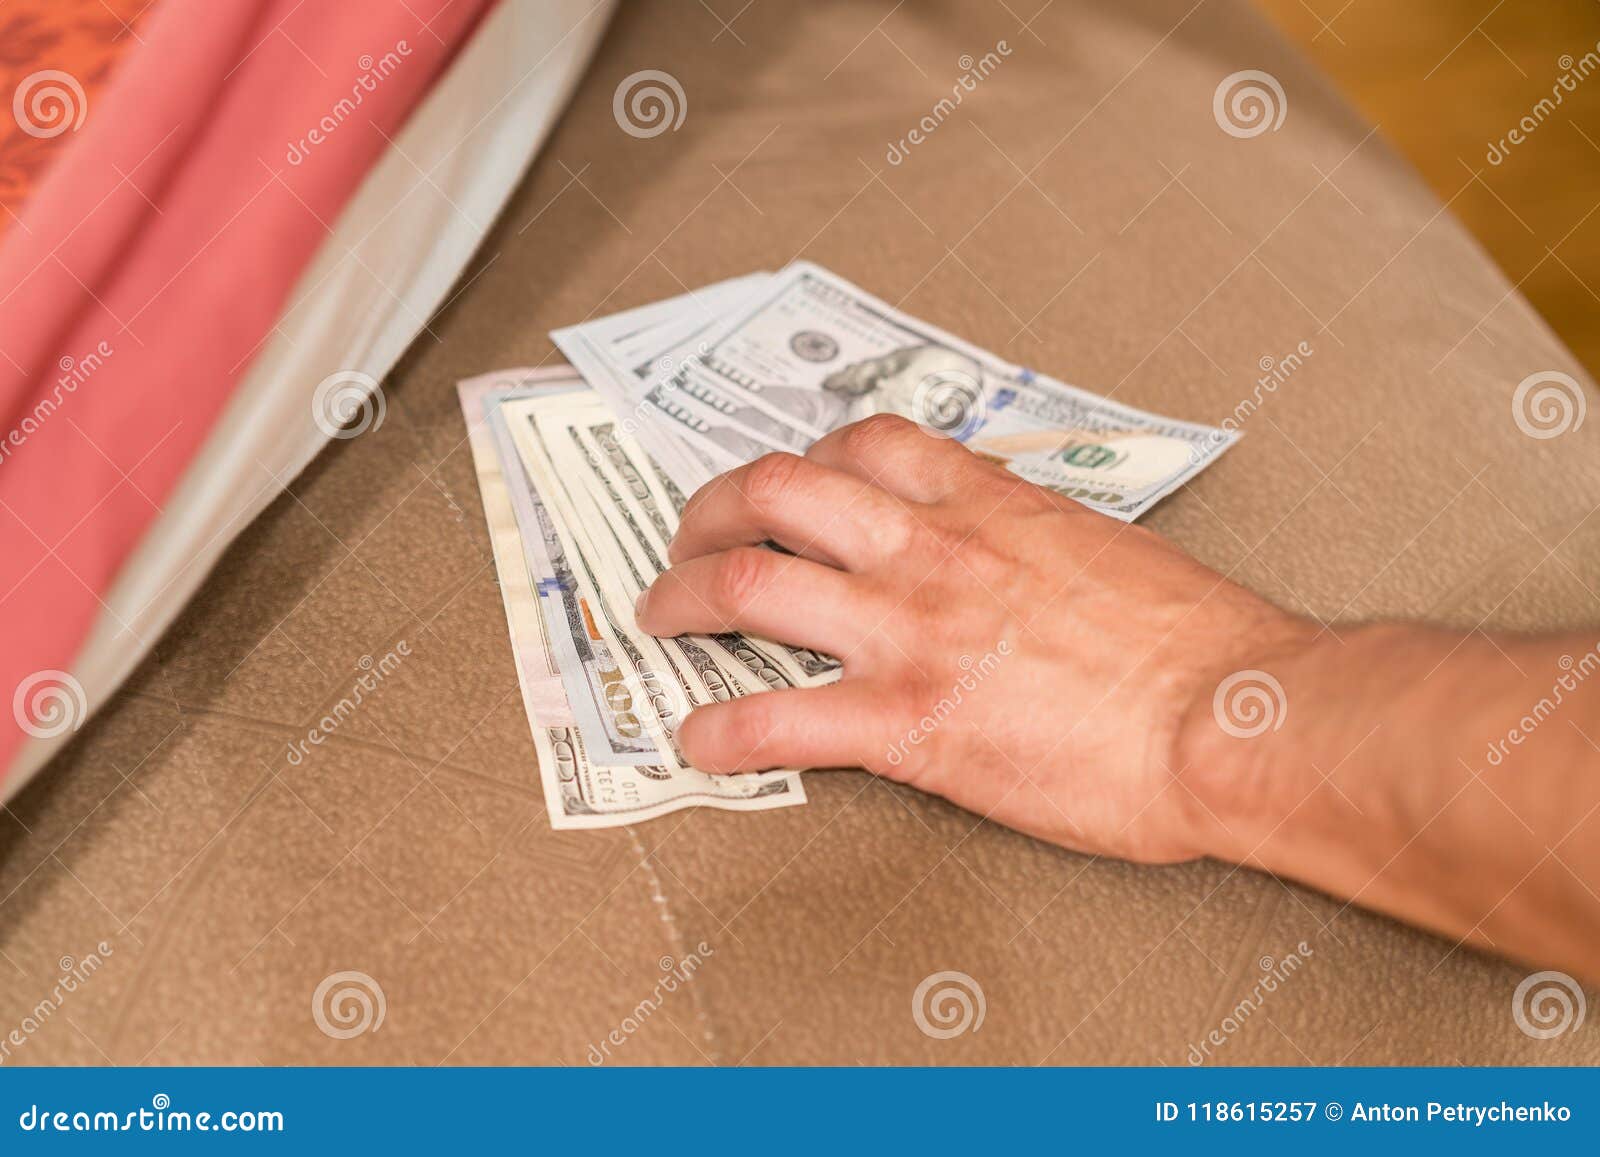 hands with money hide them under mattress. a man's hand takes money from under the pillow. a man hides money in a bed